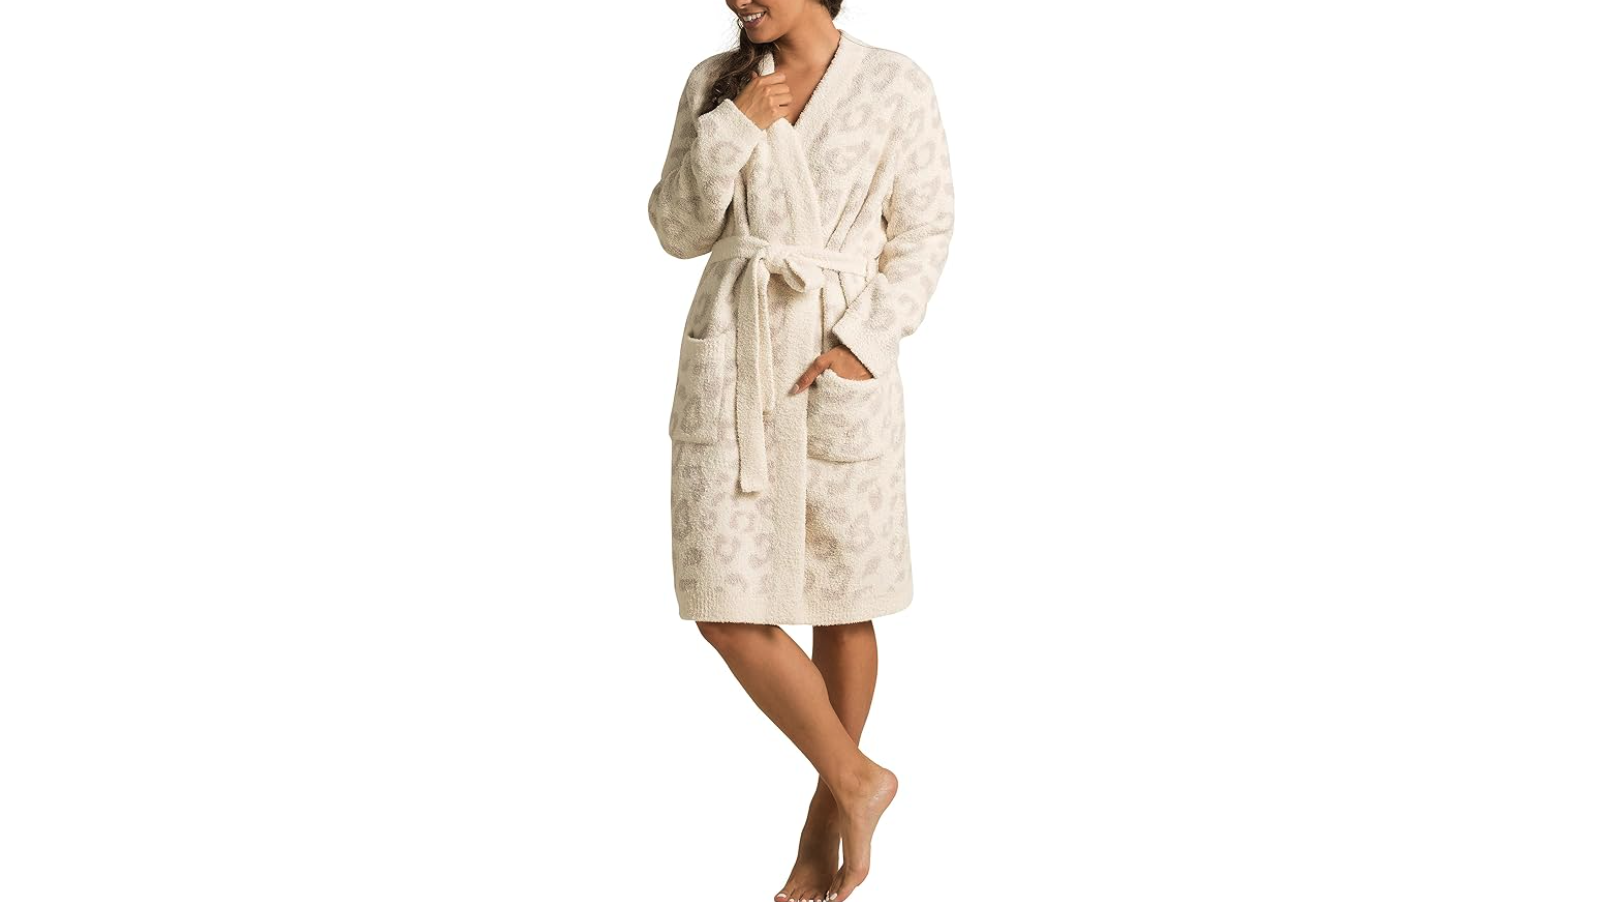 The best robes of 2023: Top reviewed bathrobes for men and